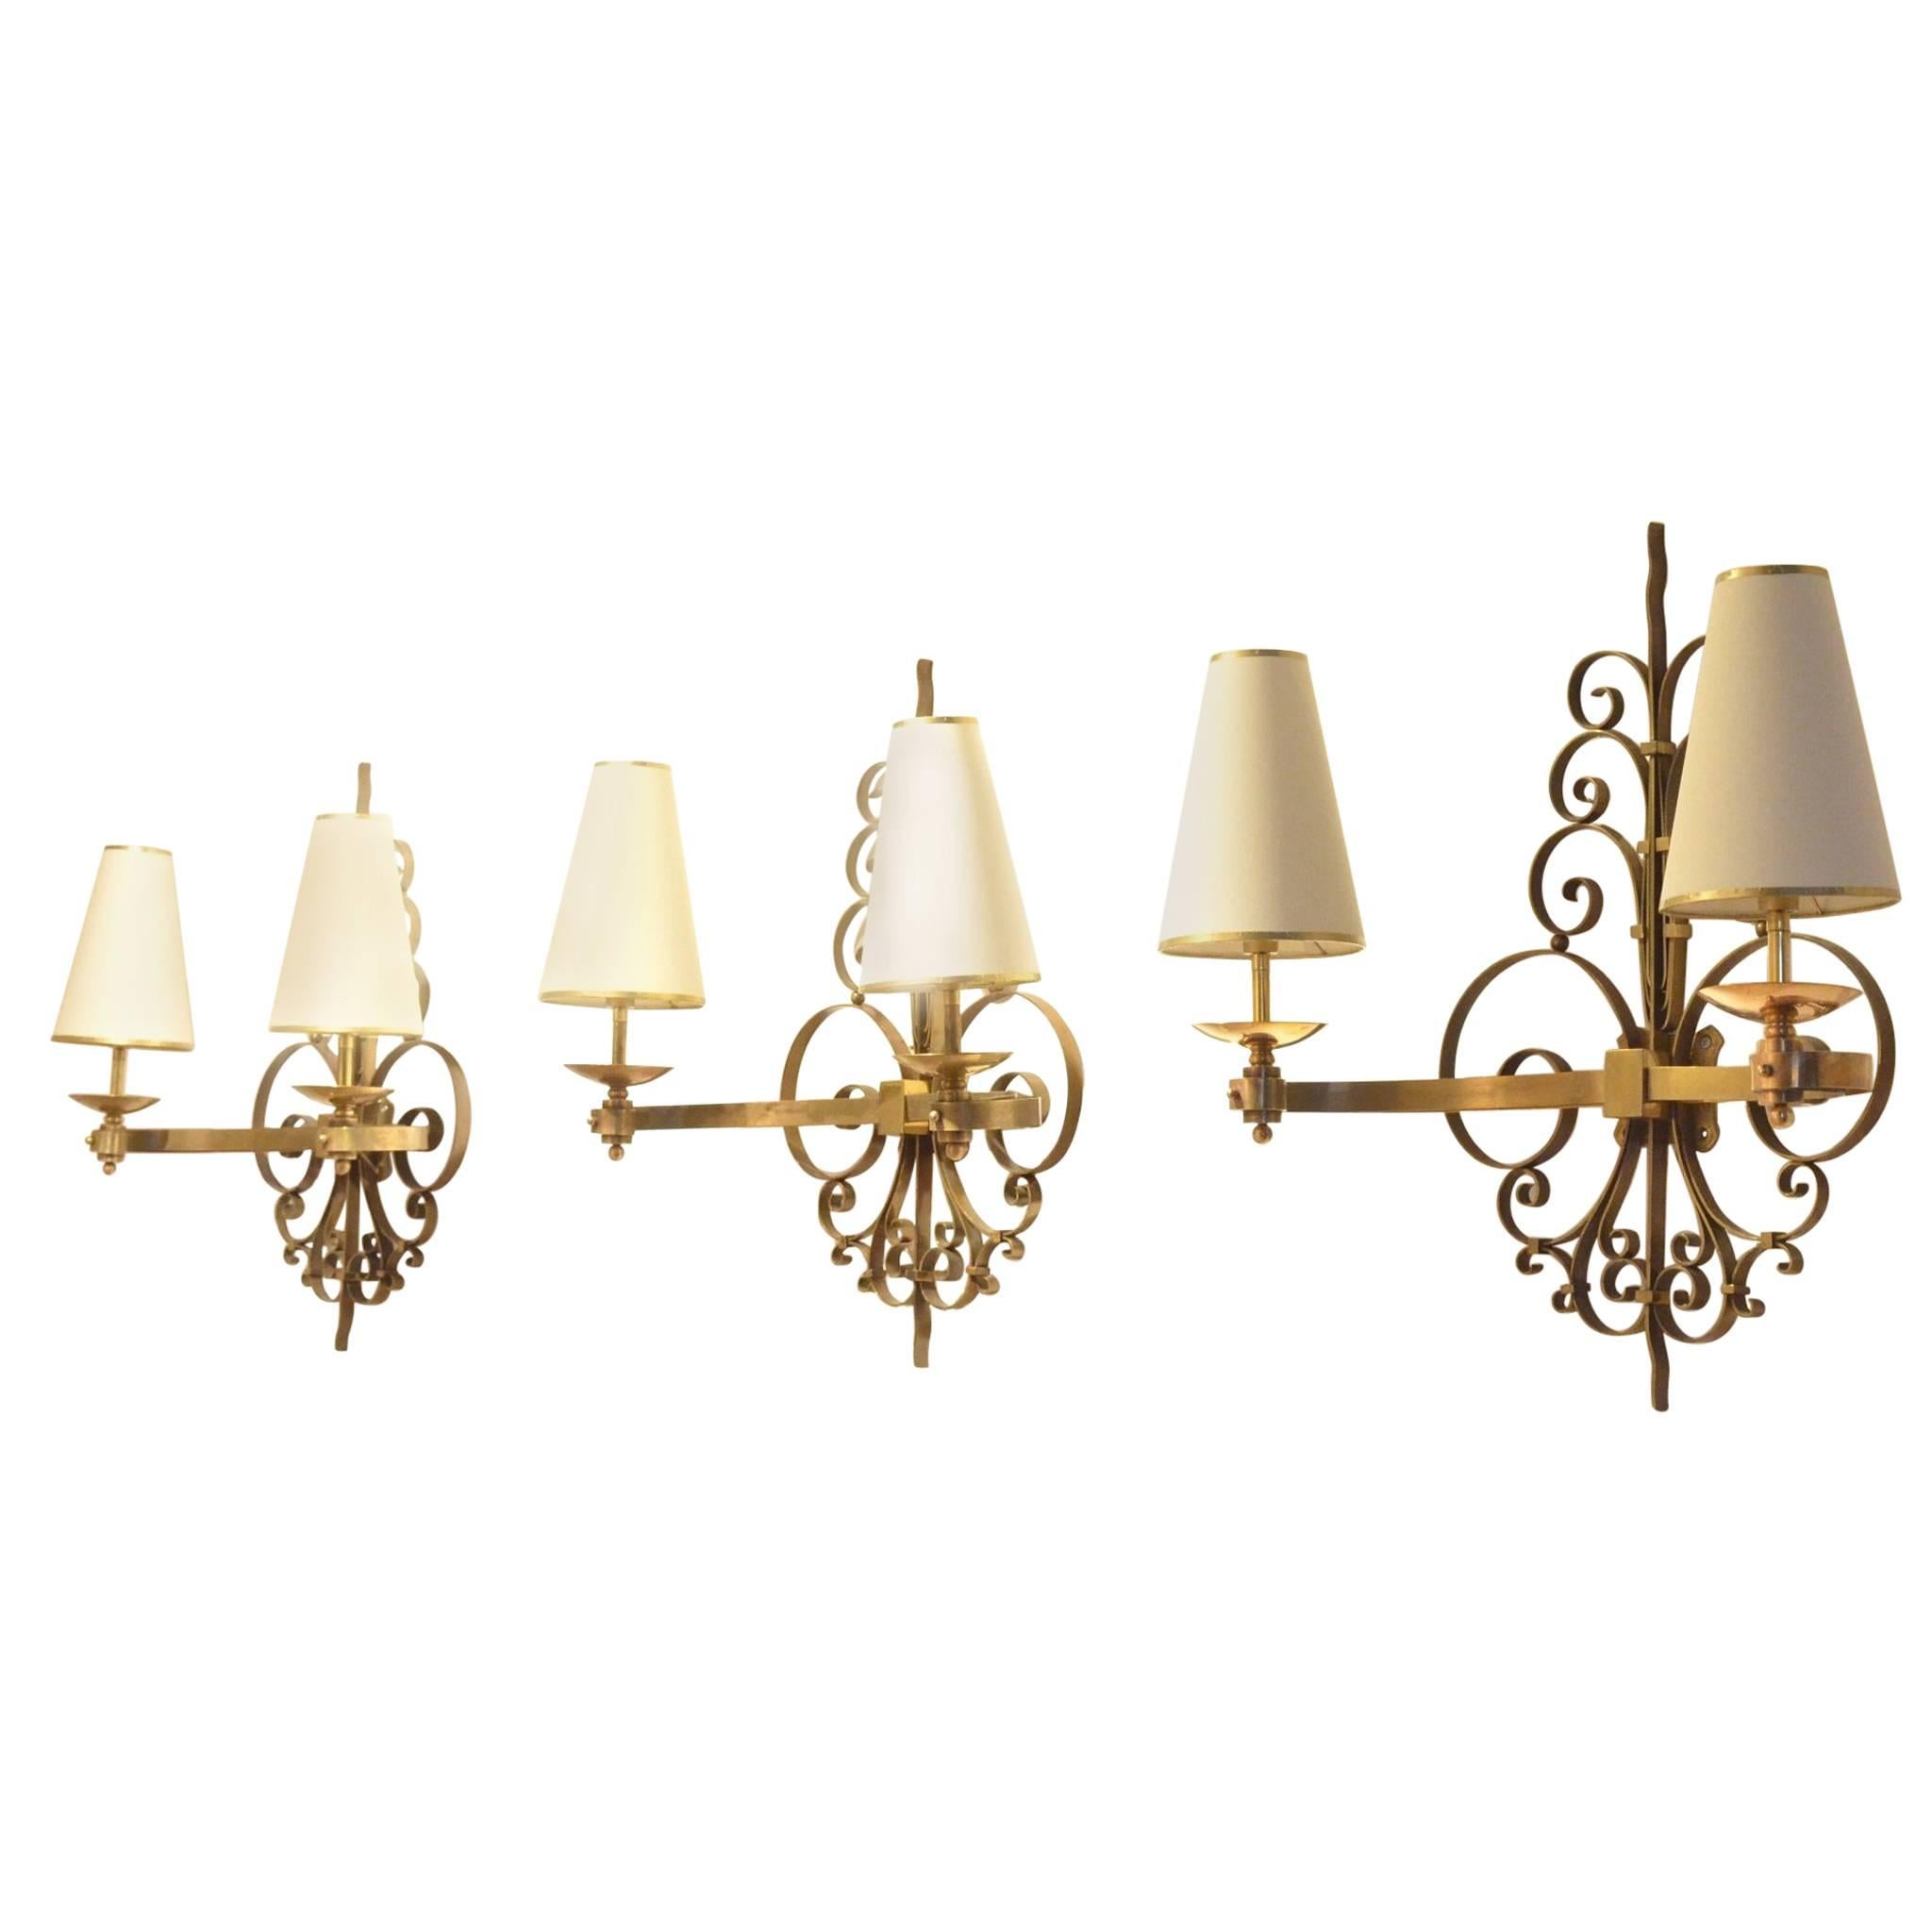 Three Art Deco René Drouet Style Sculptural Full Brass Wall Sconces Lamps, Set For Sale